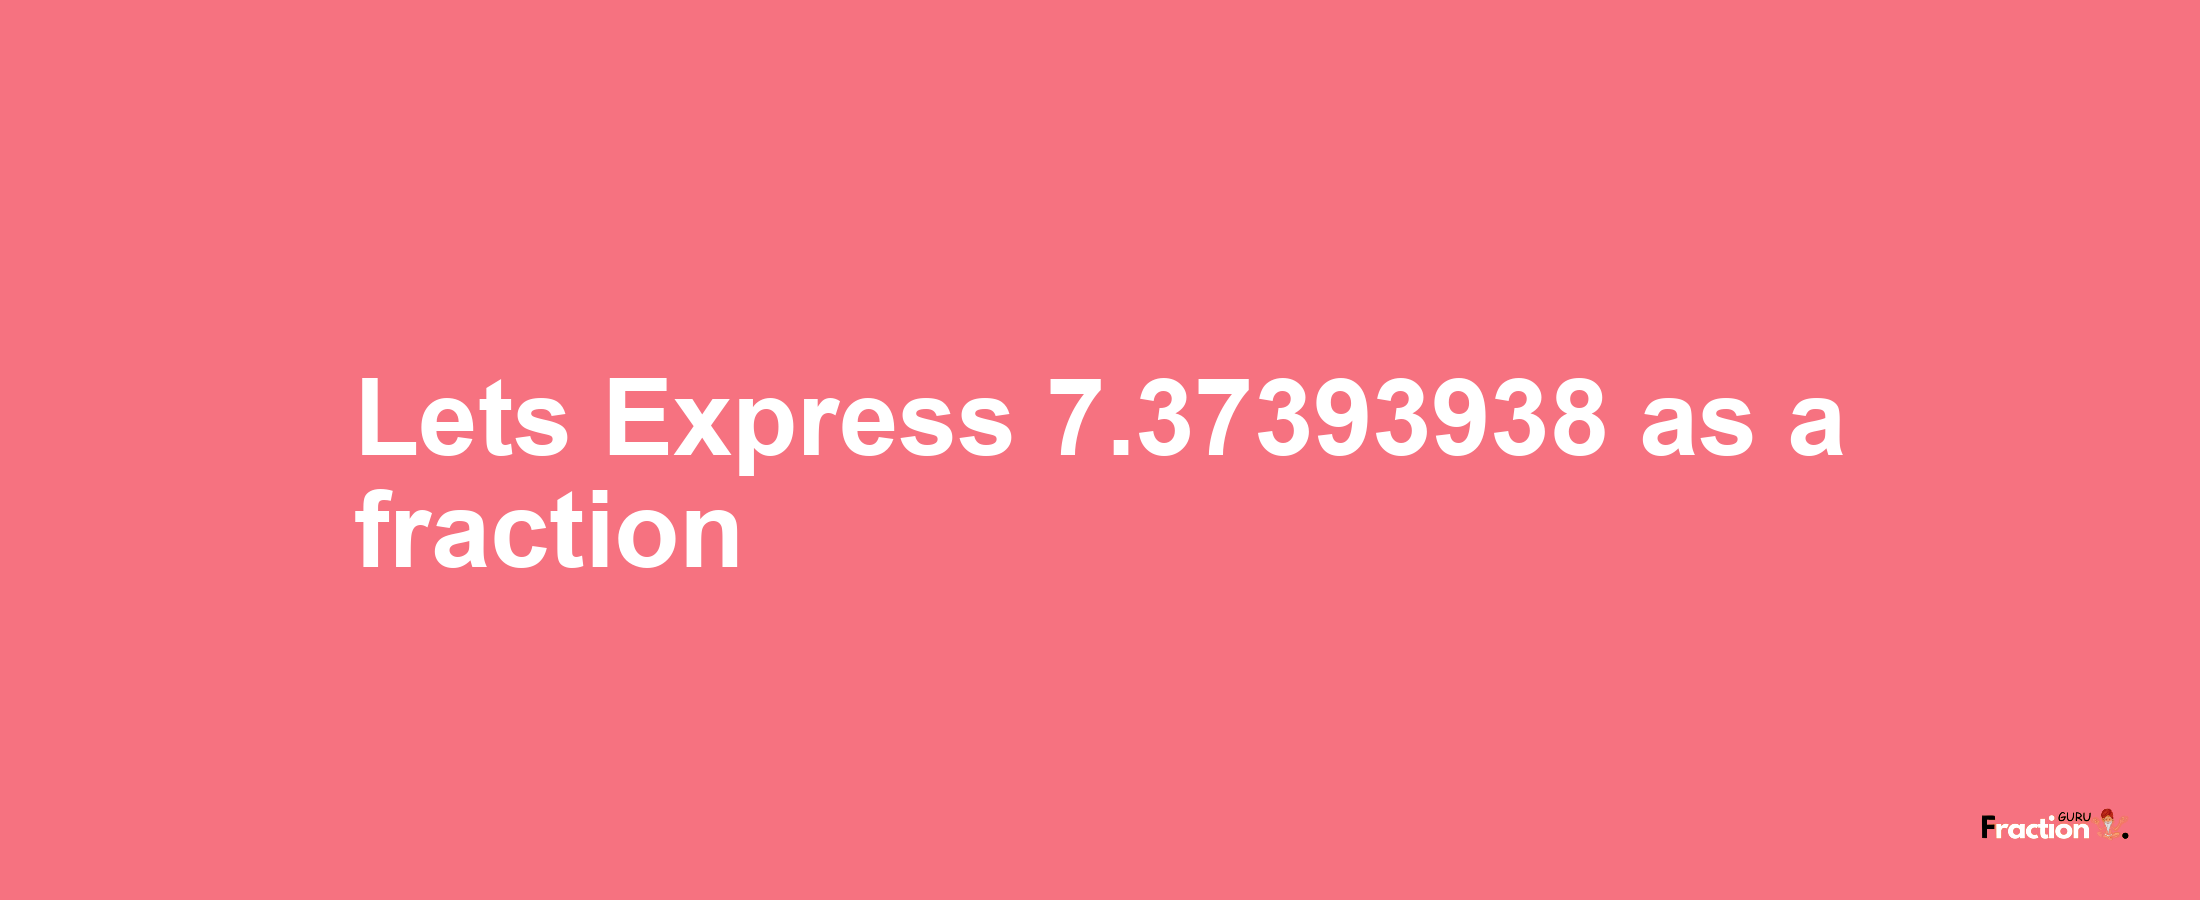 Lets Express 7.37393938 as afraction